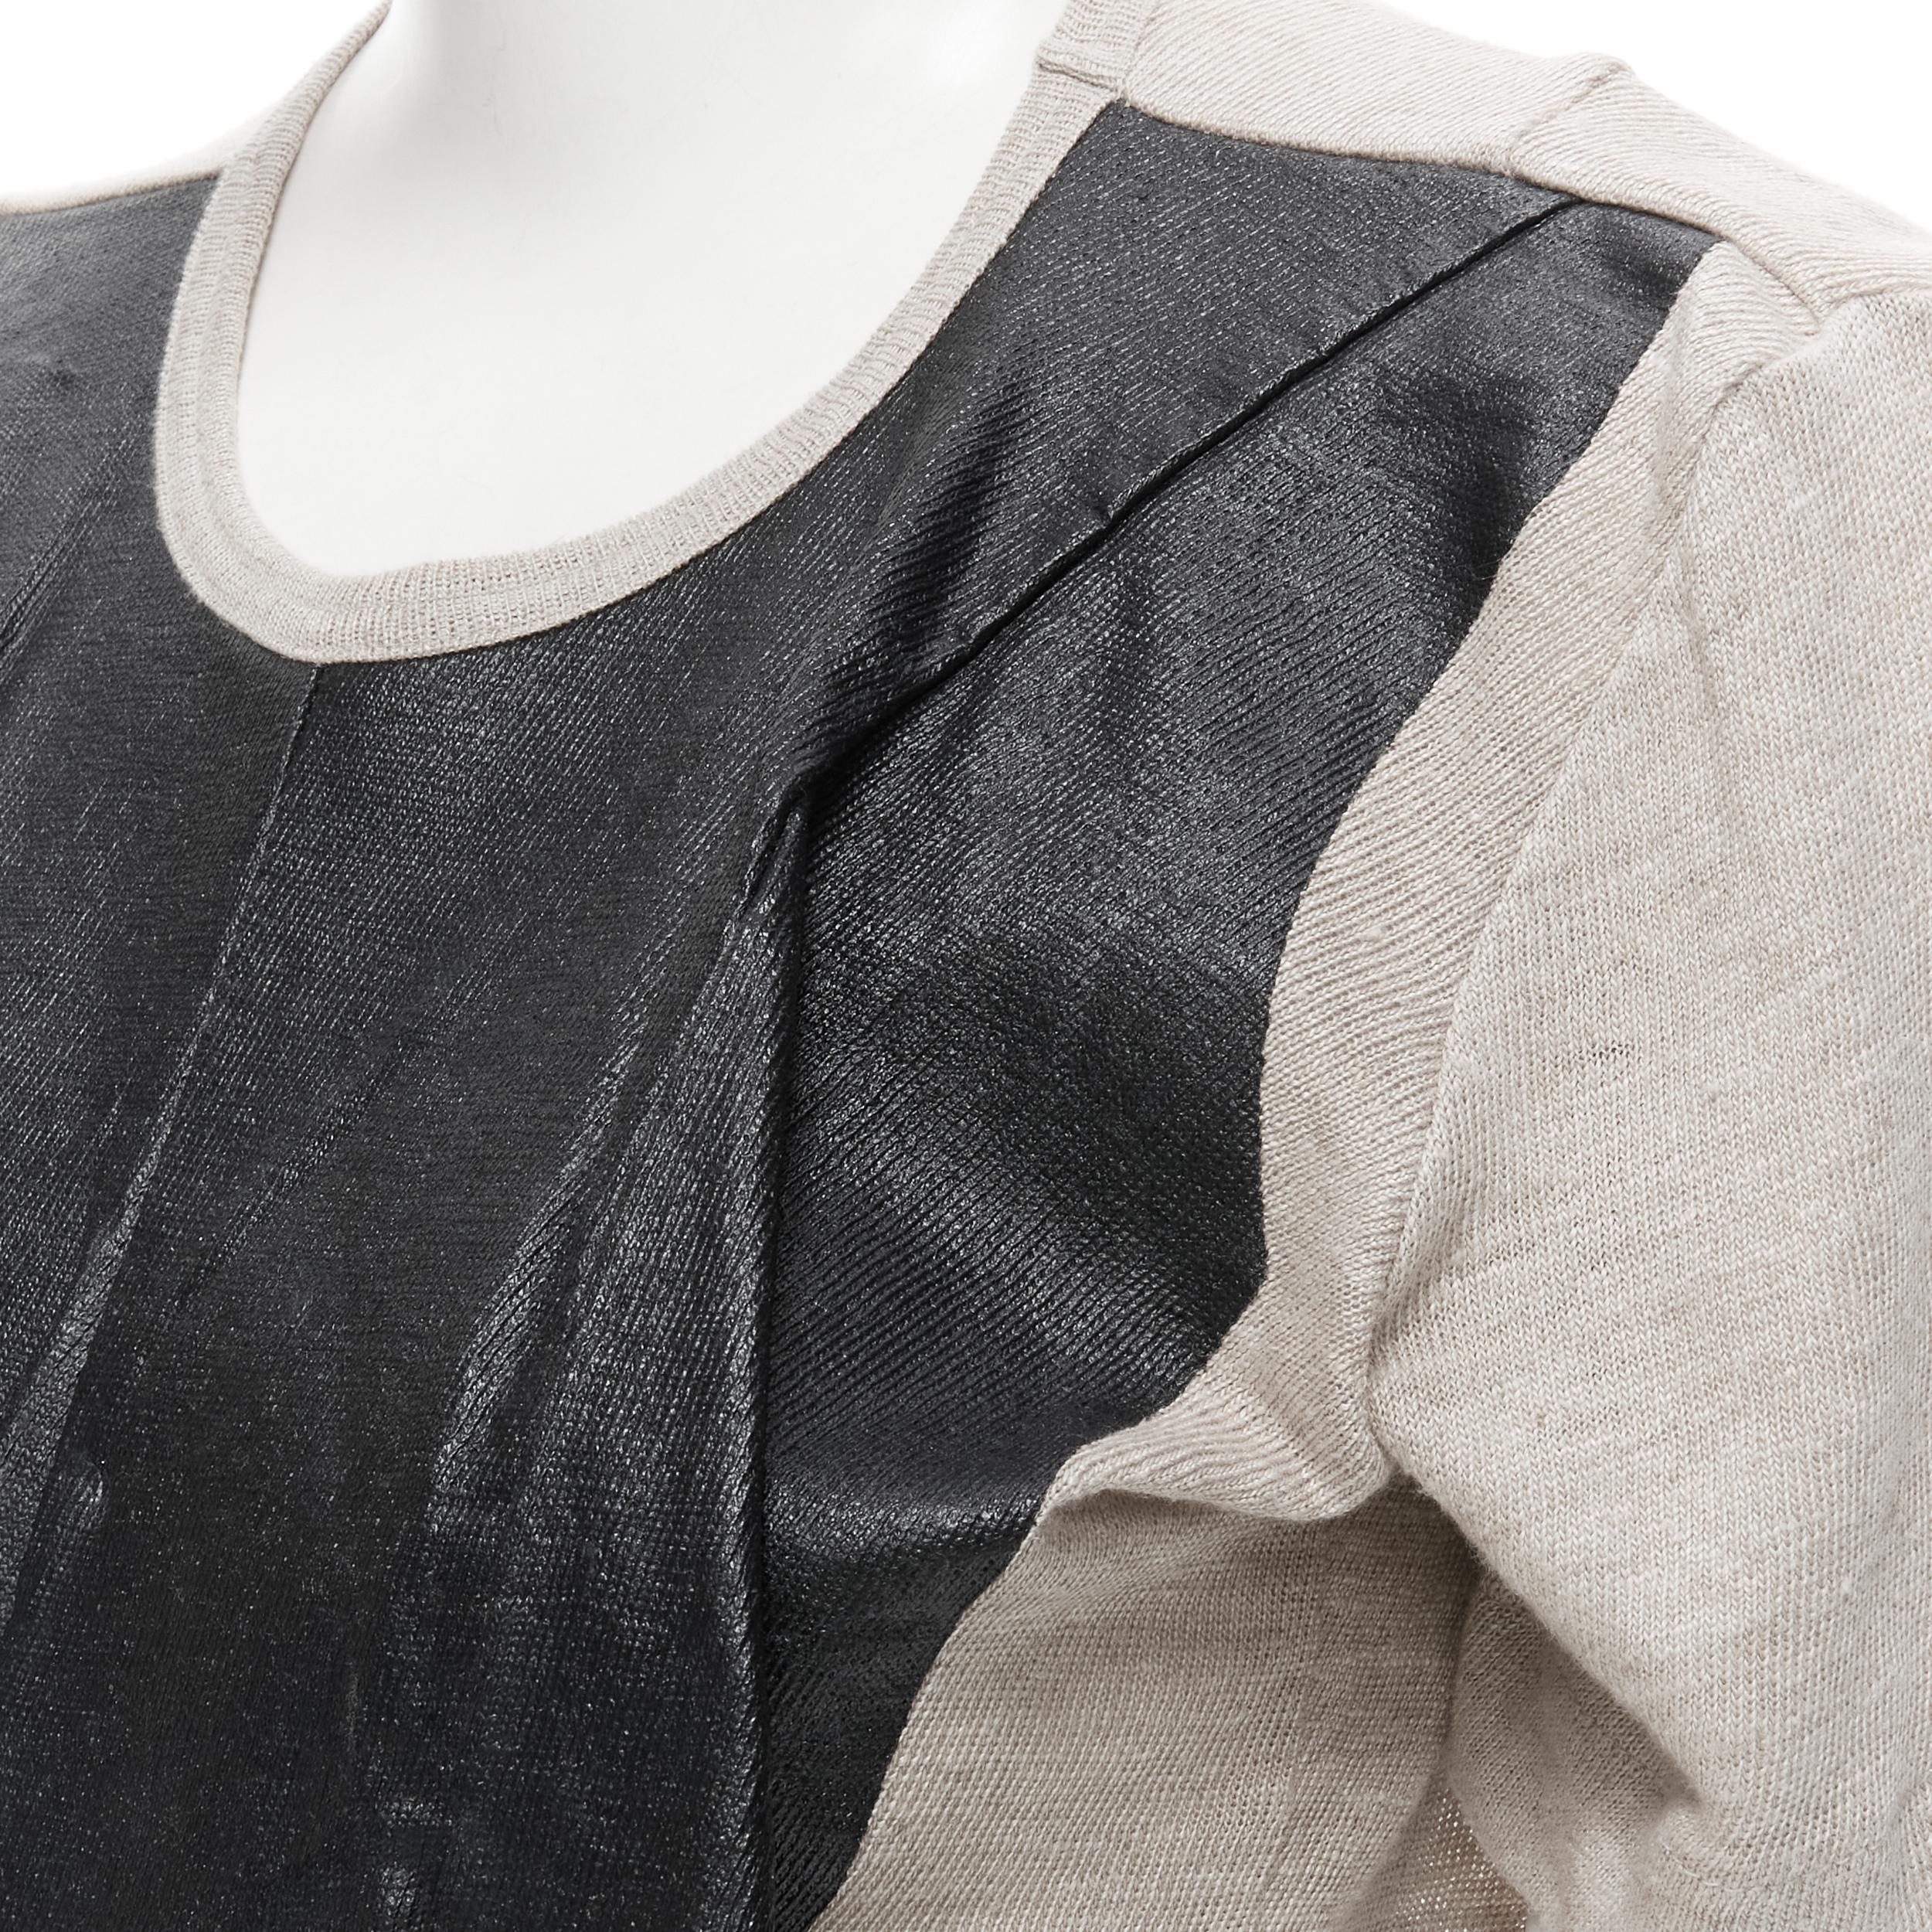 vintage JUNYA WATANABE 1998 grey linen black lacquered front sweater top S 
Reference: CRTI/A00330 
Brand: Junya Watanabe 
Designer: Junya Watanabe 
Collection: 1998 
Material: Linen 
Color: Grey 
Pattern: Solid 
Extra Detail: Lacquared painted